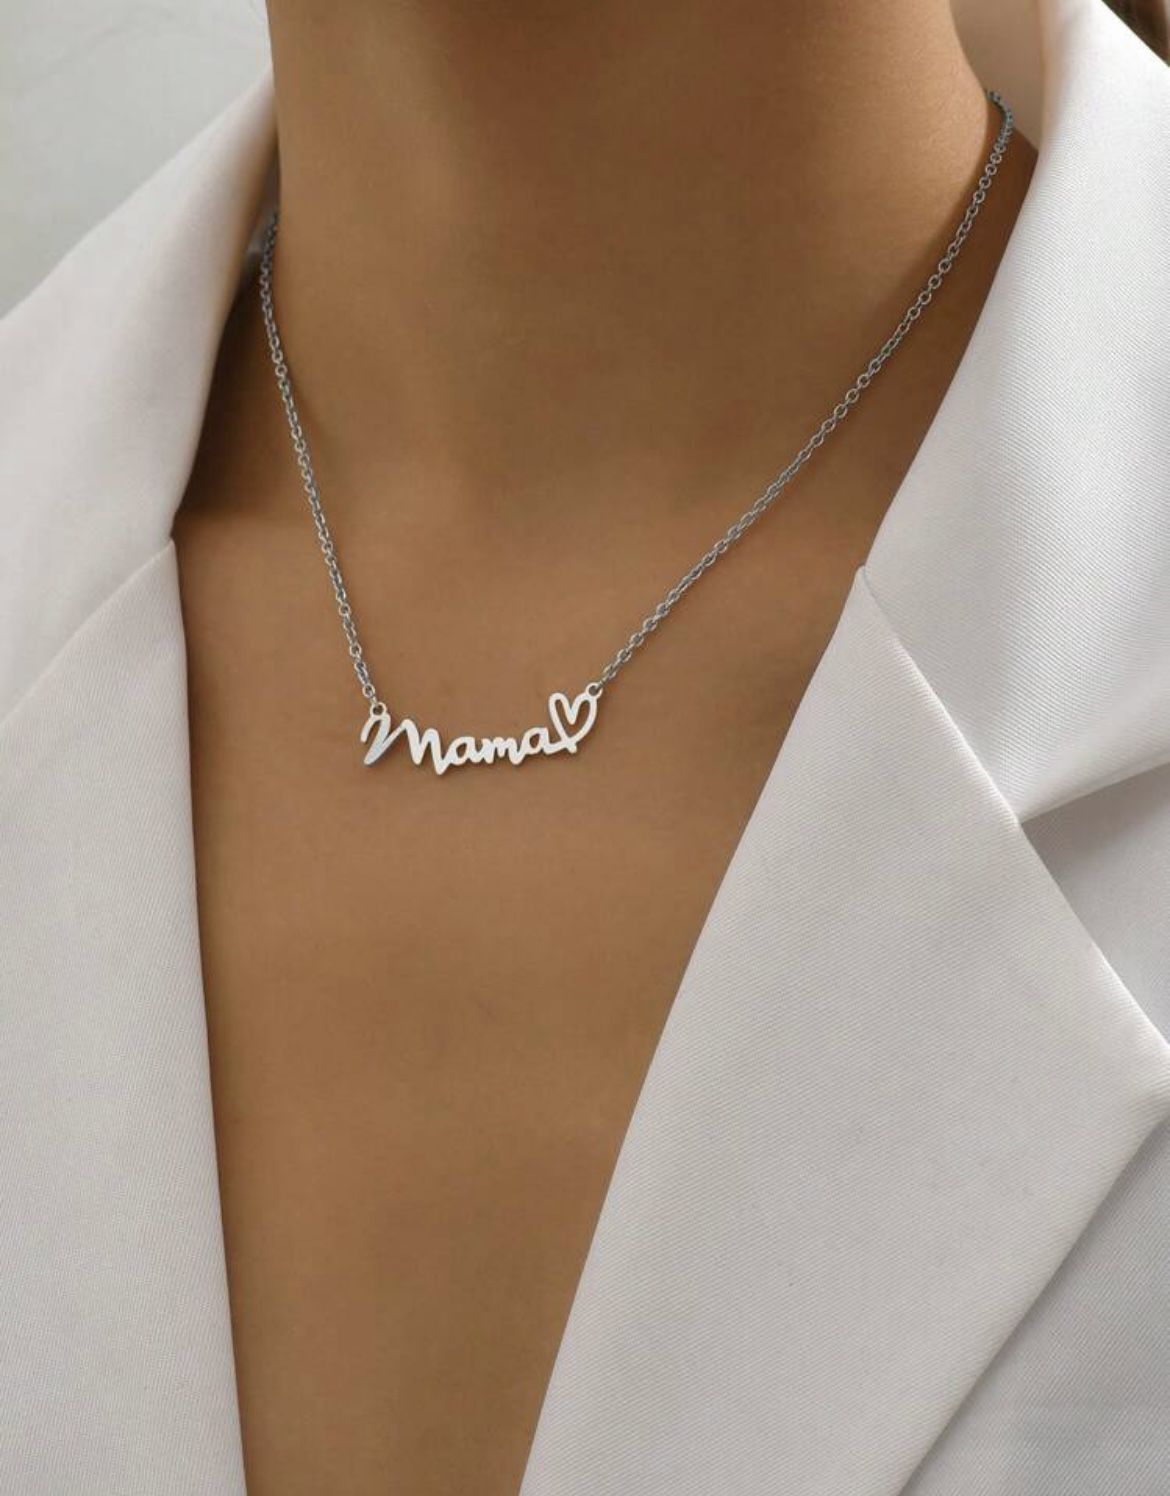 Silver Mama Necklace/Chain for Women /Mothers Day